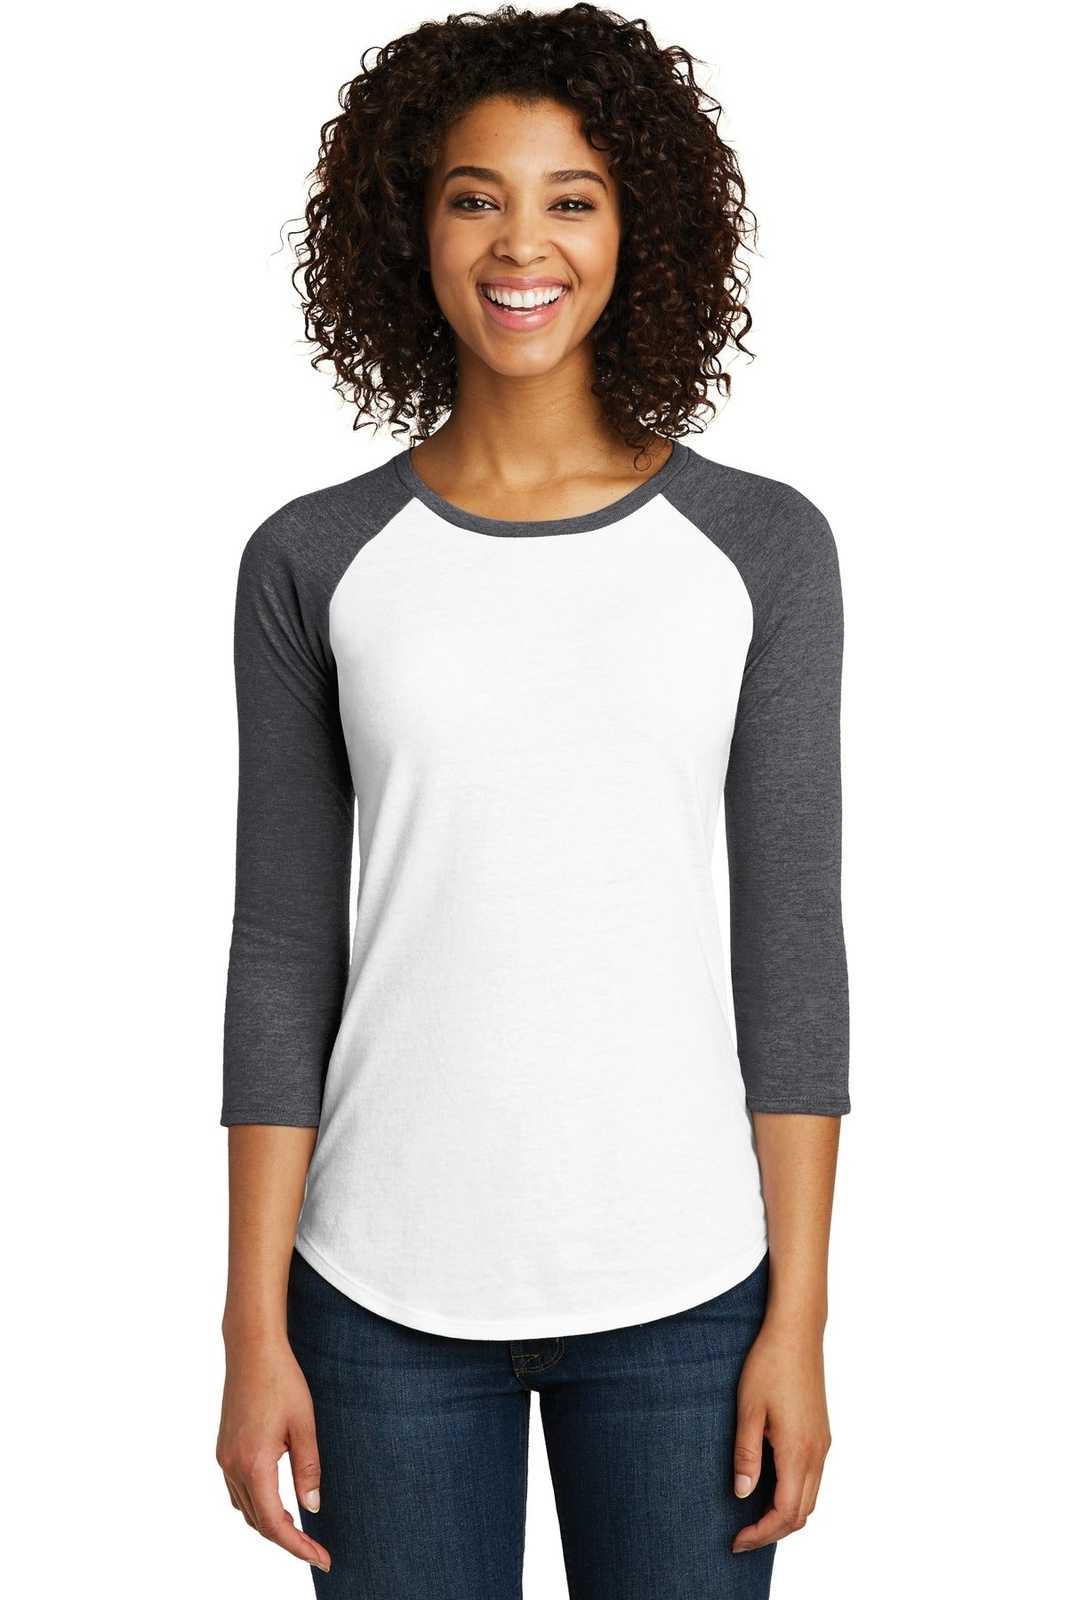 District DT6211 Women's Fitted Very Important Tee 3/4-Sleeve Raglan - Heathered Charcoal White - HIT a Double - 1